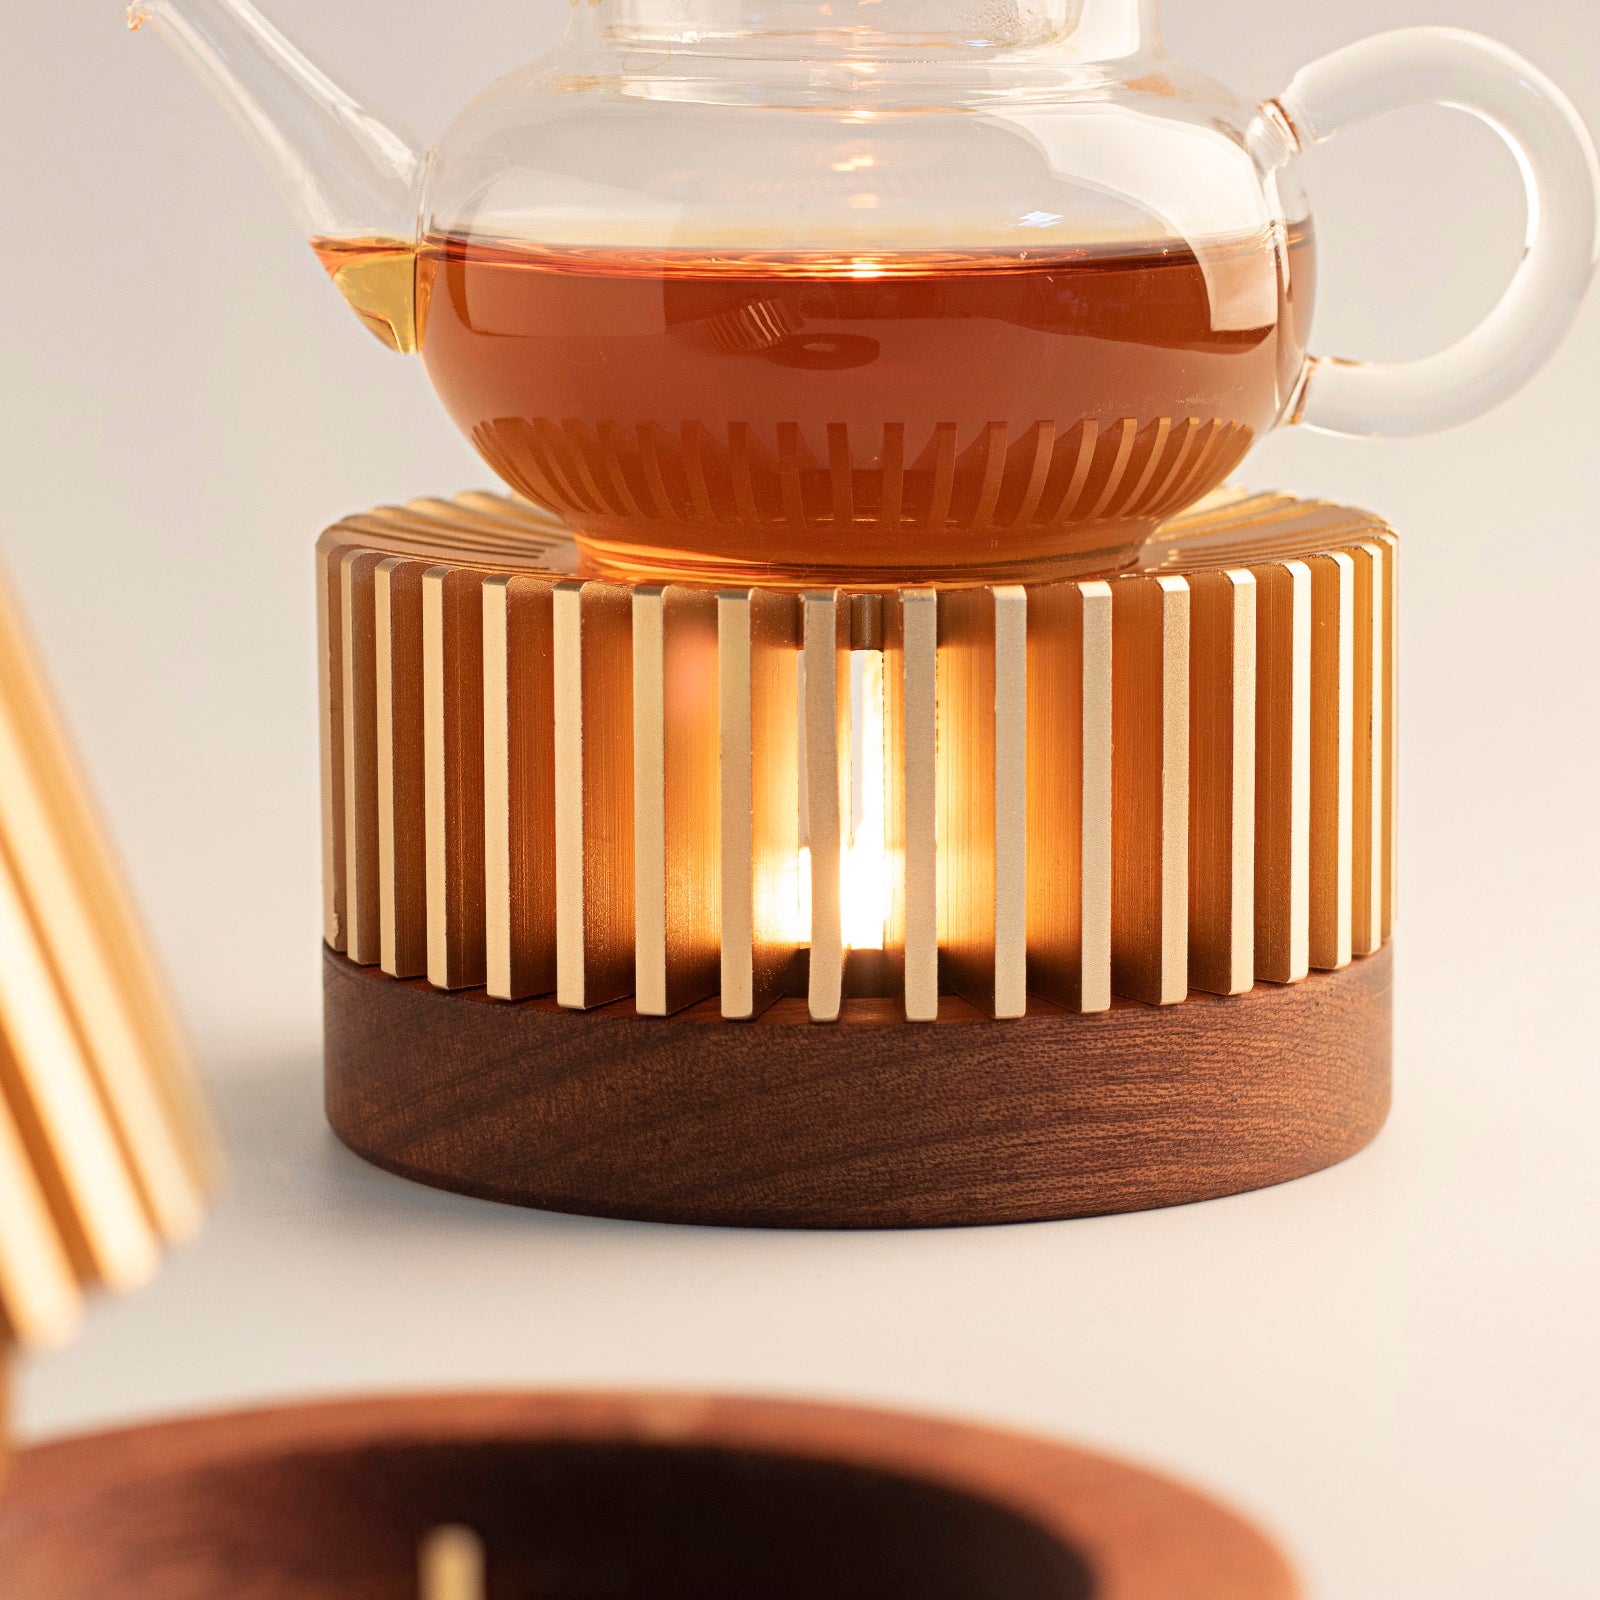 Bamboo's Grocery Lokii Ceramic Teapot Warmer, Teapot Heater, Tea Light Warmer, Suitable for Teapot and Mugs, 6 Inches (Candles Not Included)